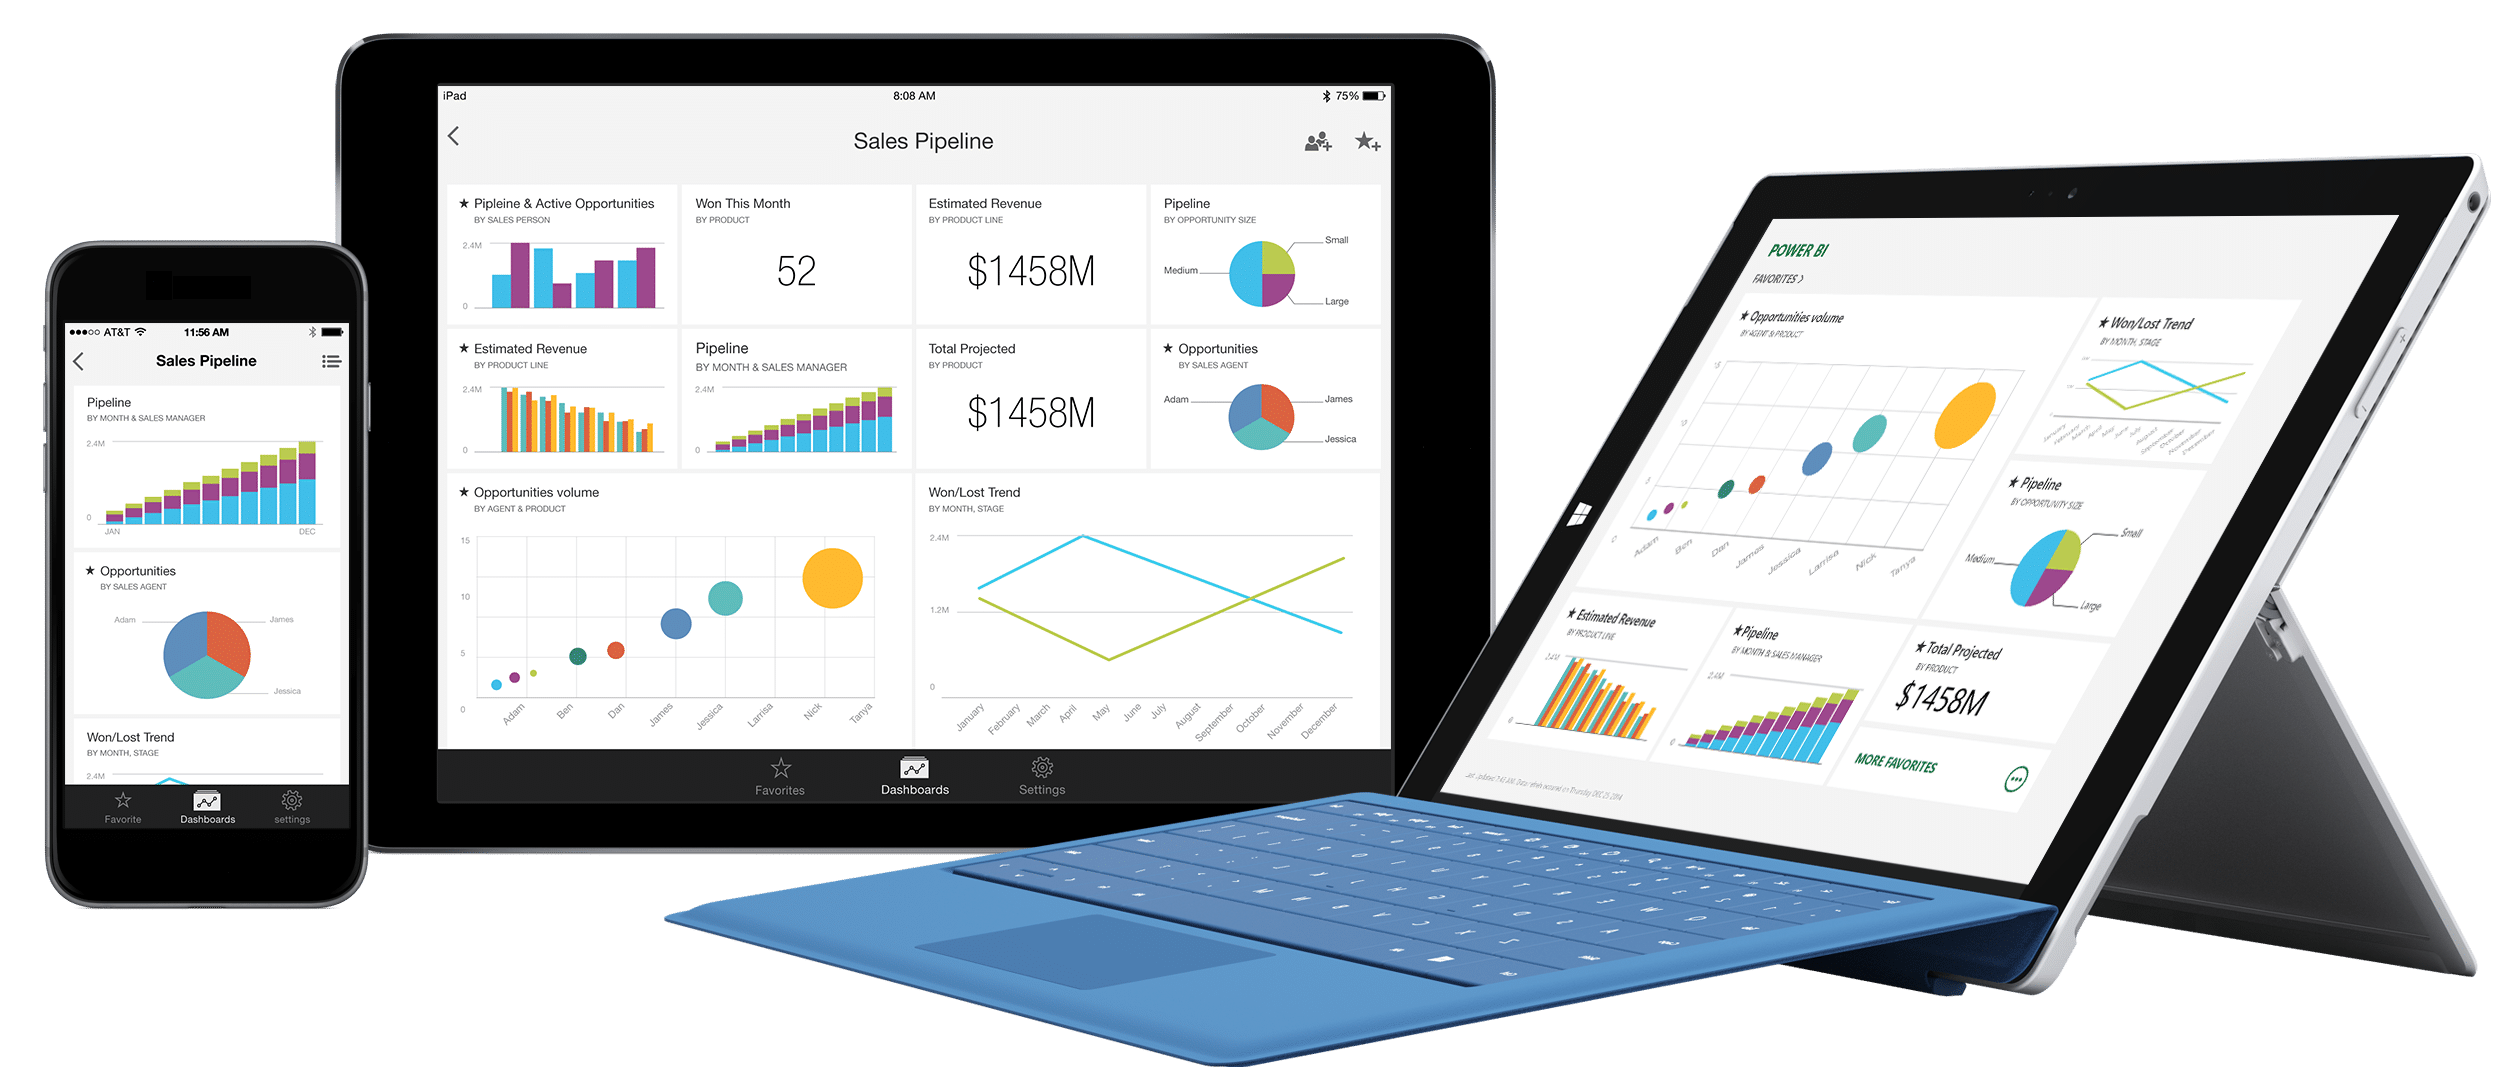 Why Power BI is a Revolutionary Business Intelligence Tool?